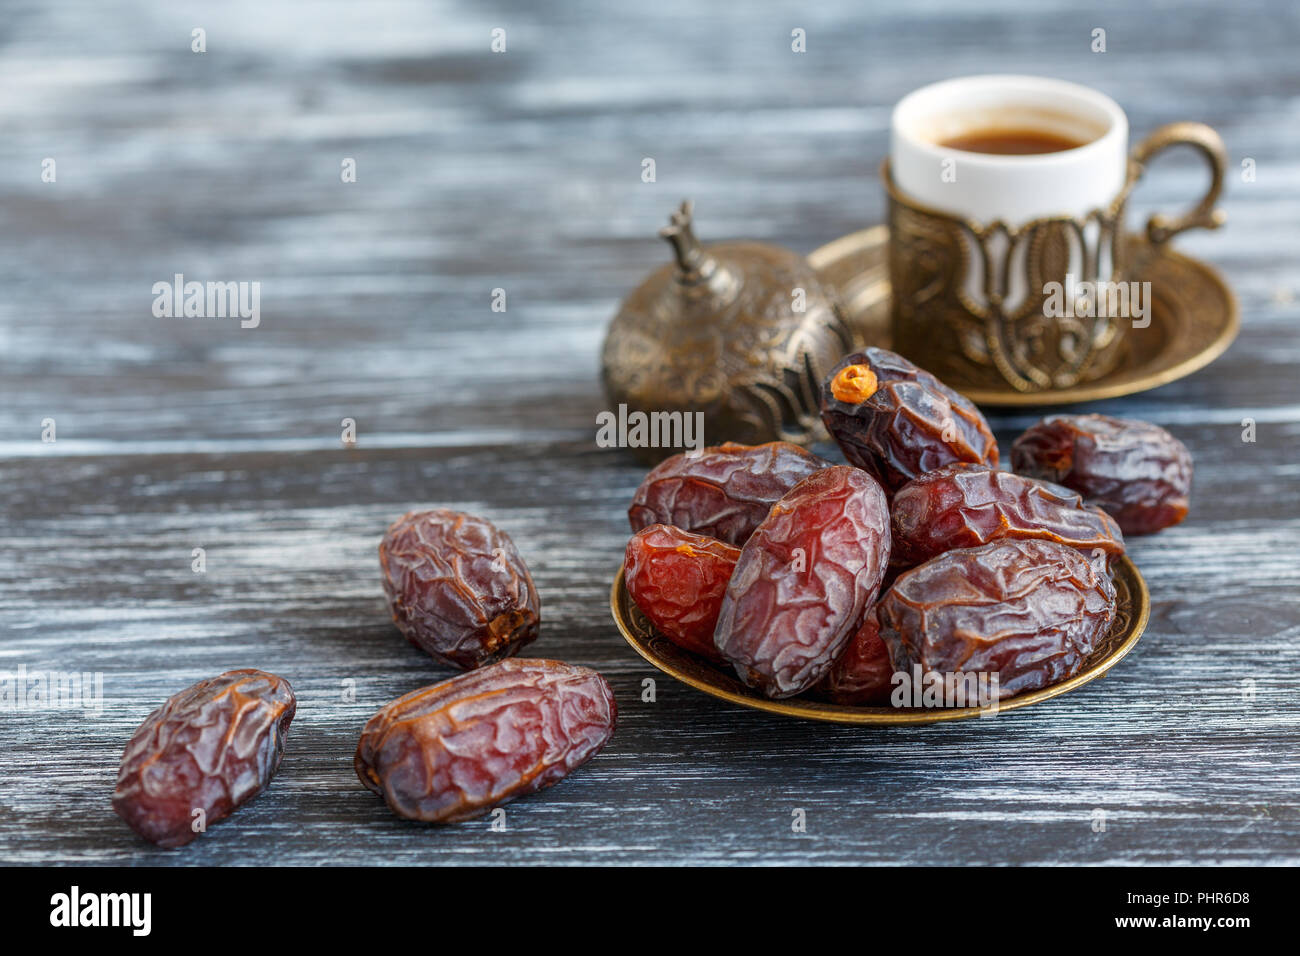 Dates on the plate and black coffee. Stock Photo